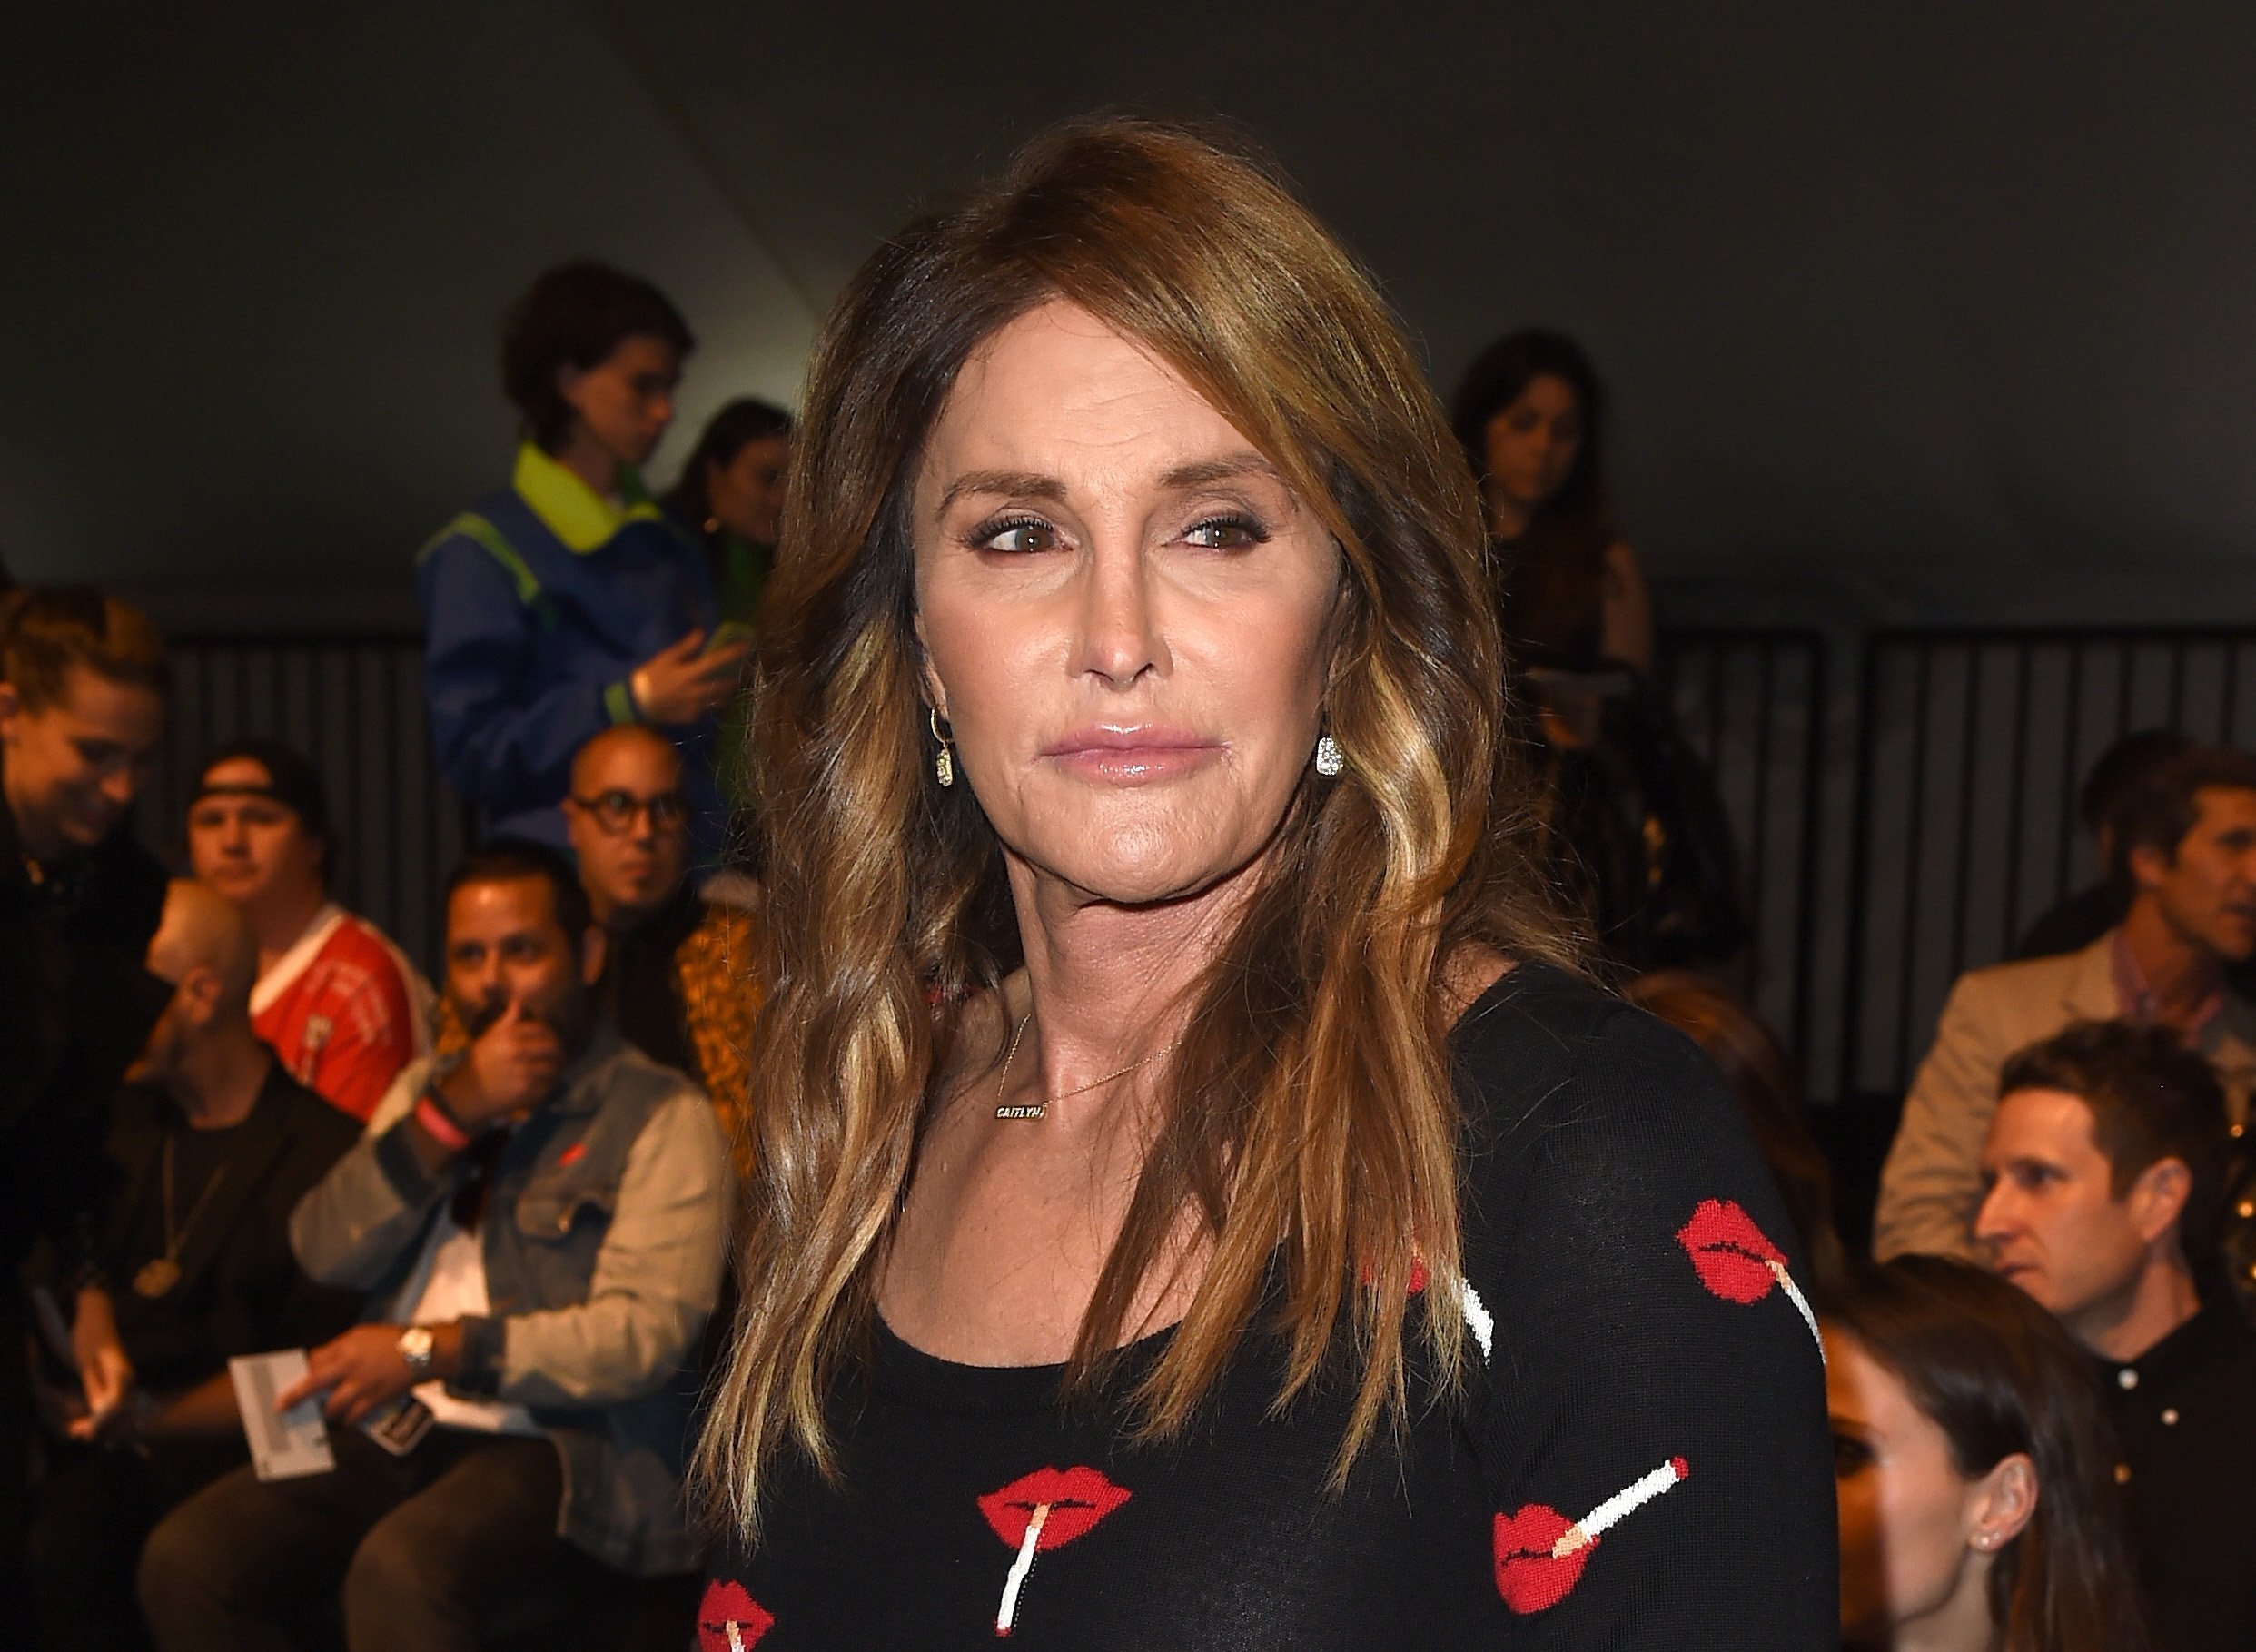 Caitlyn Jenner on June 10, 2016 in Los Angeles, California | Photo: Getty Images